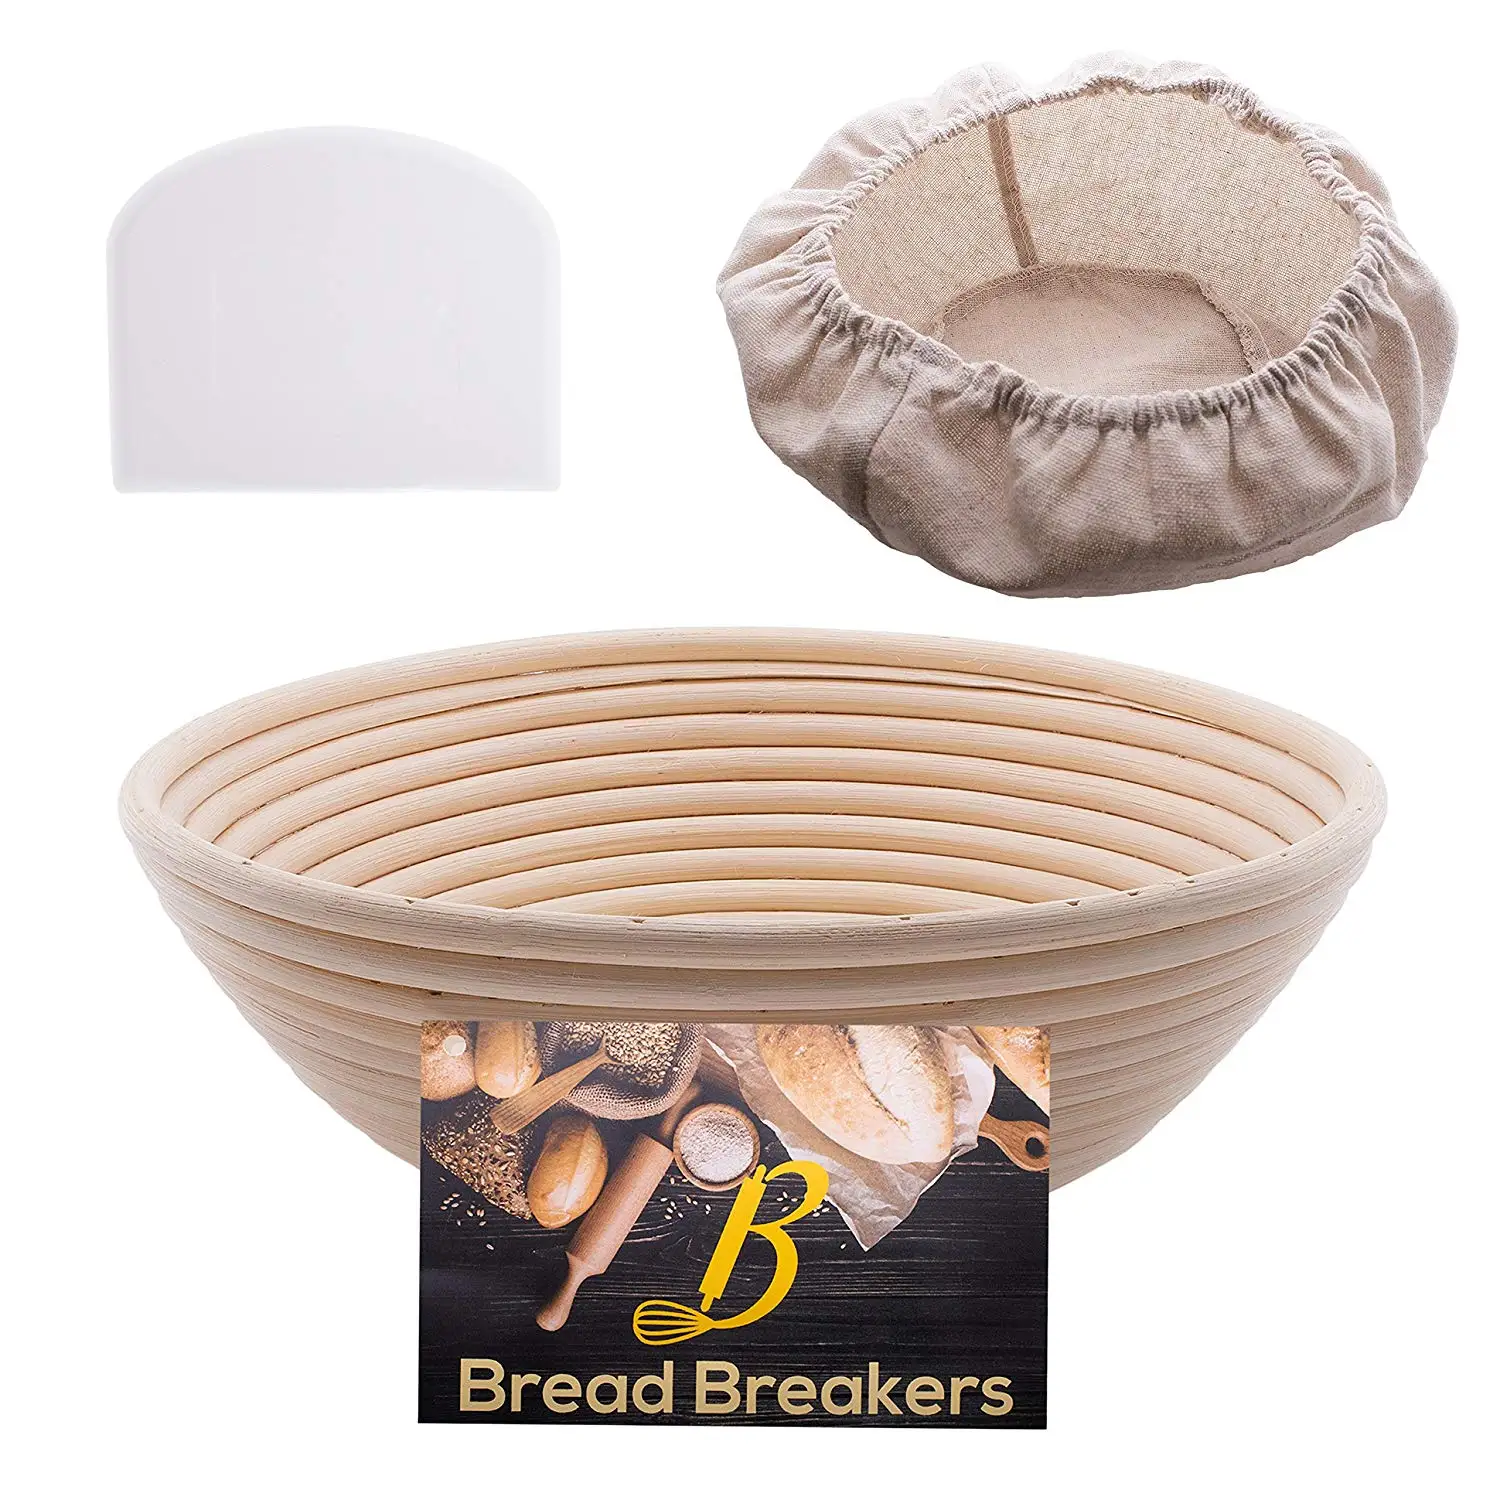 Cheap Bread Baskets For Proofing Find Bread Baskets For Proofing Deals